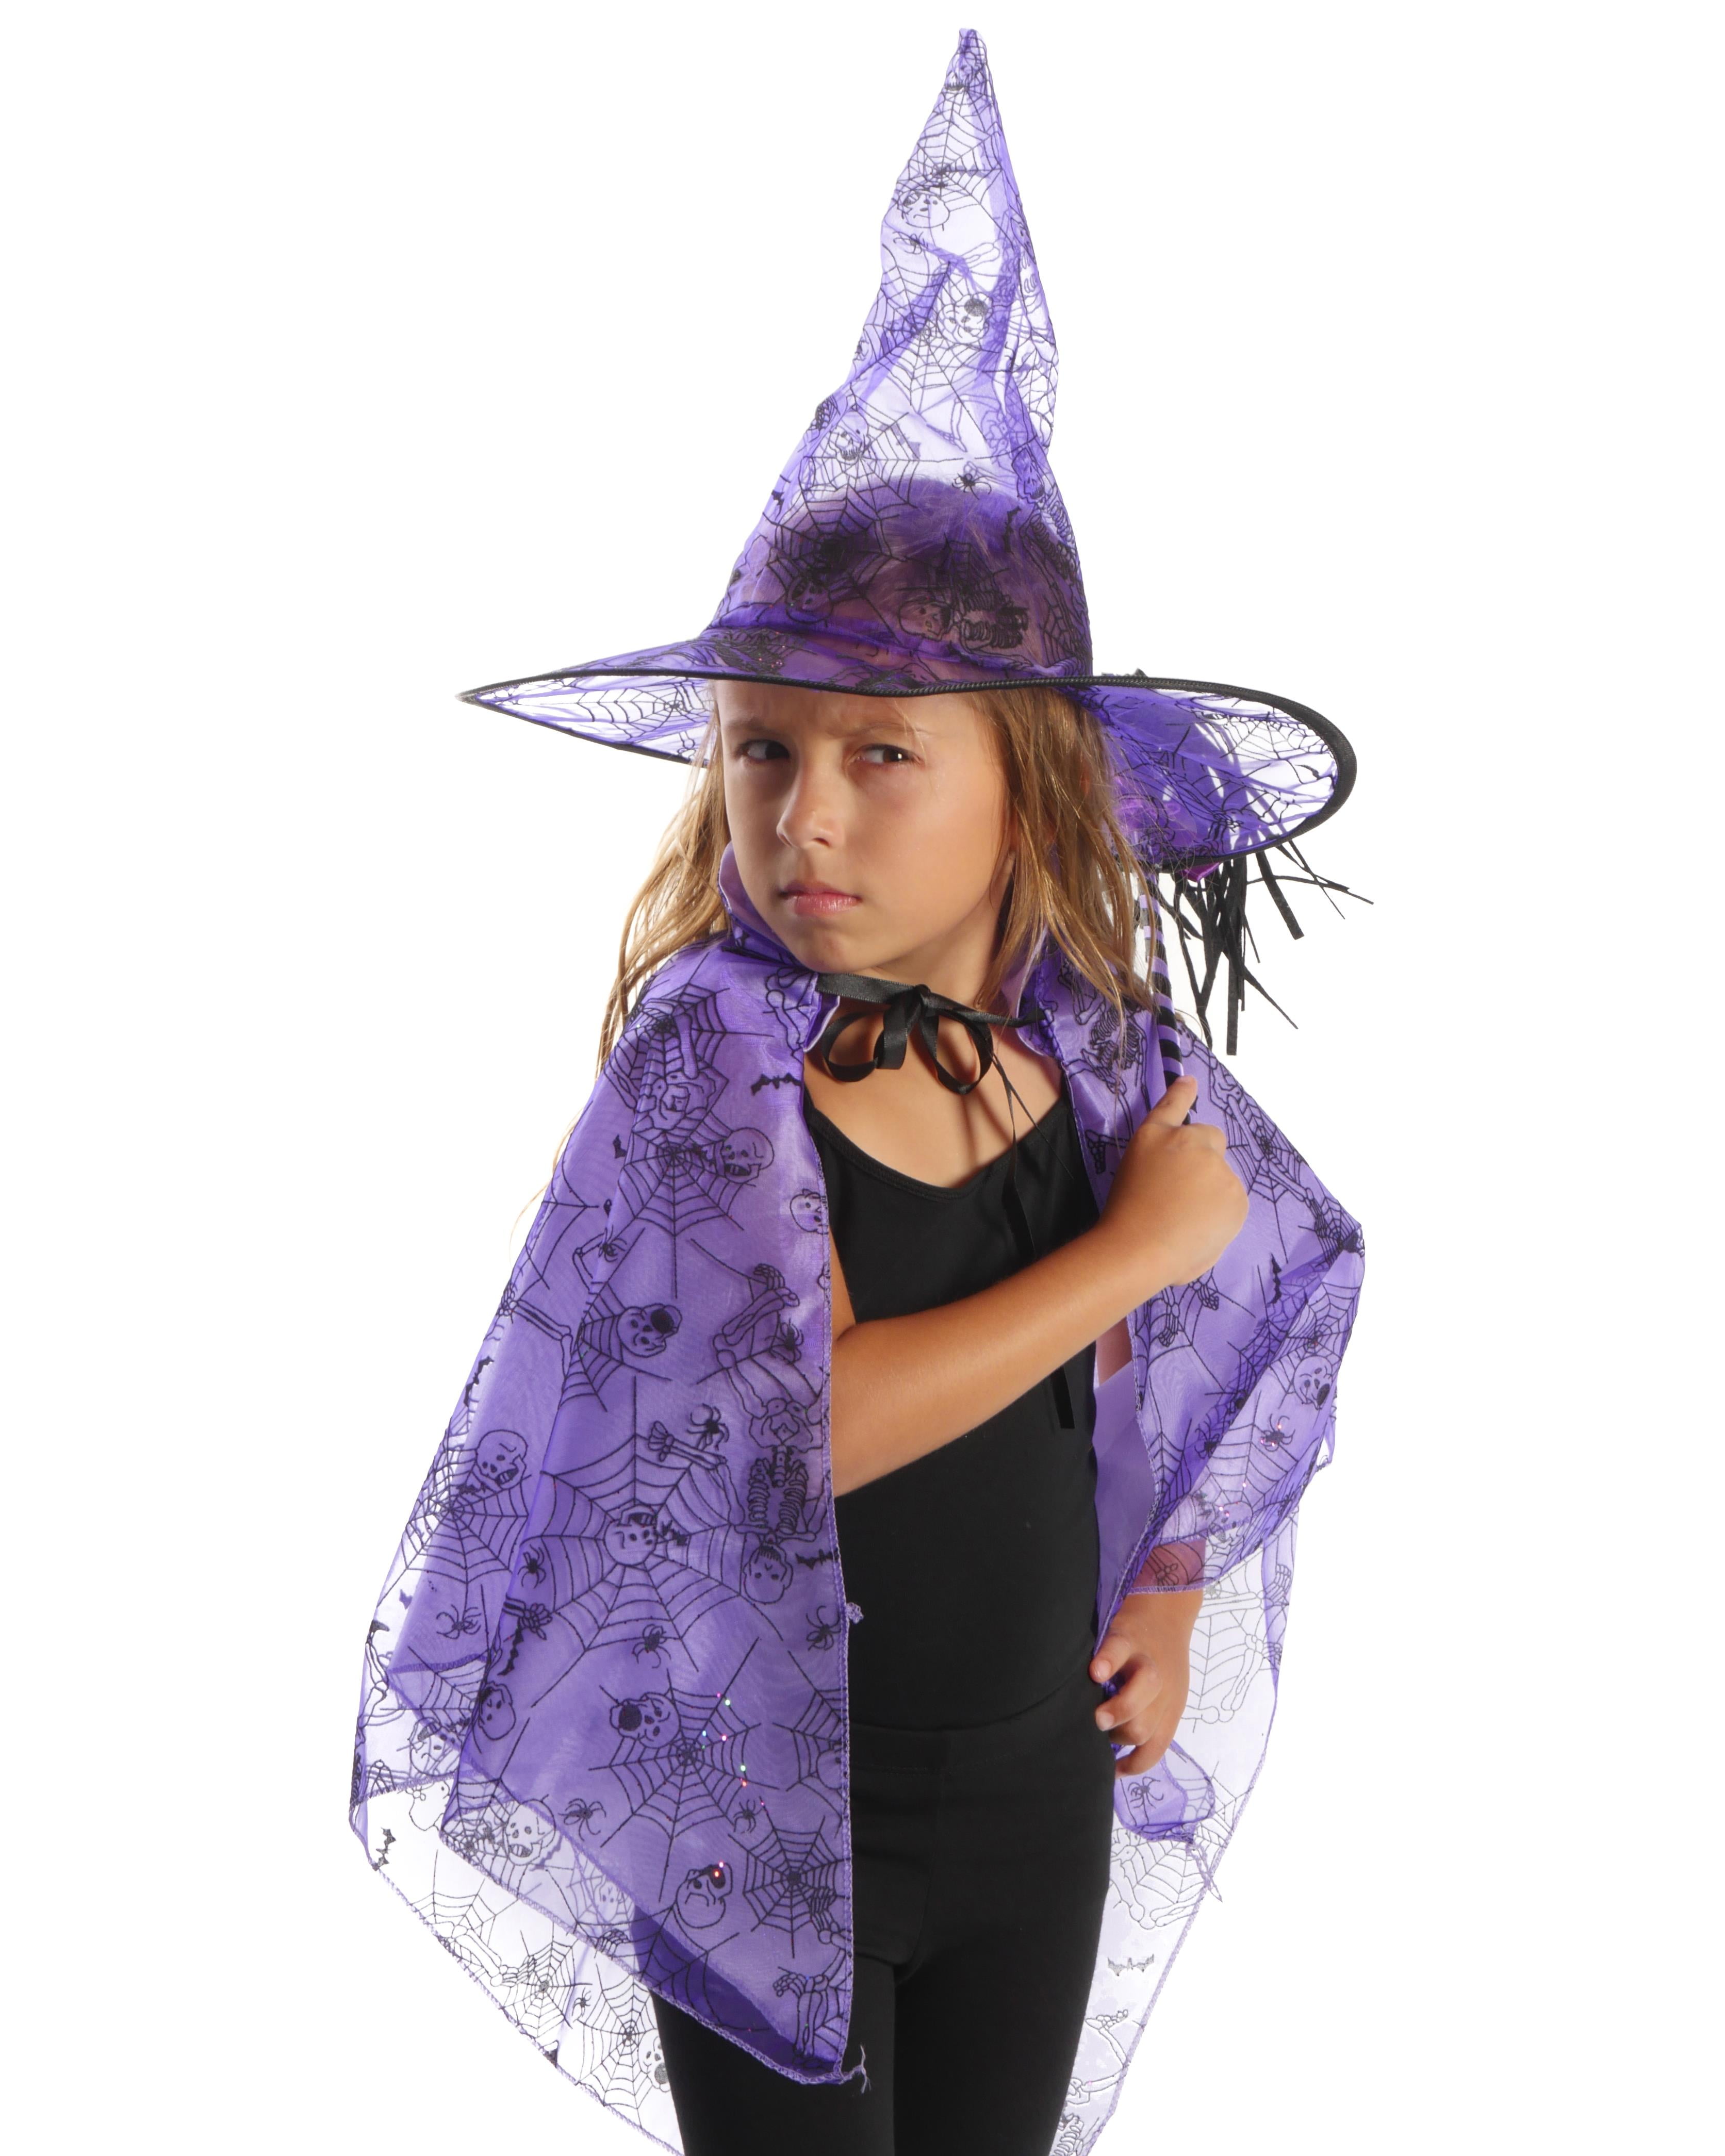 3Pcs Kid Girls Halloween Witch Cosplay Outfit Pumpkin Mesh Dress Pointed Hat Set